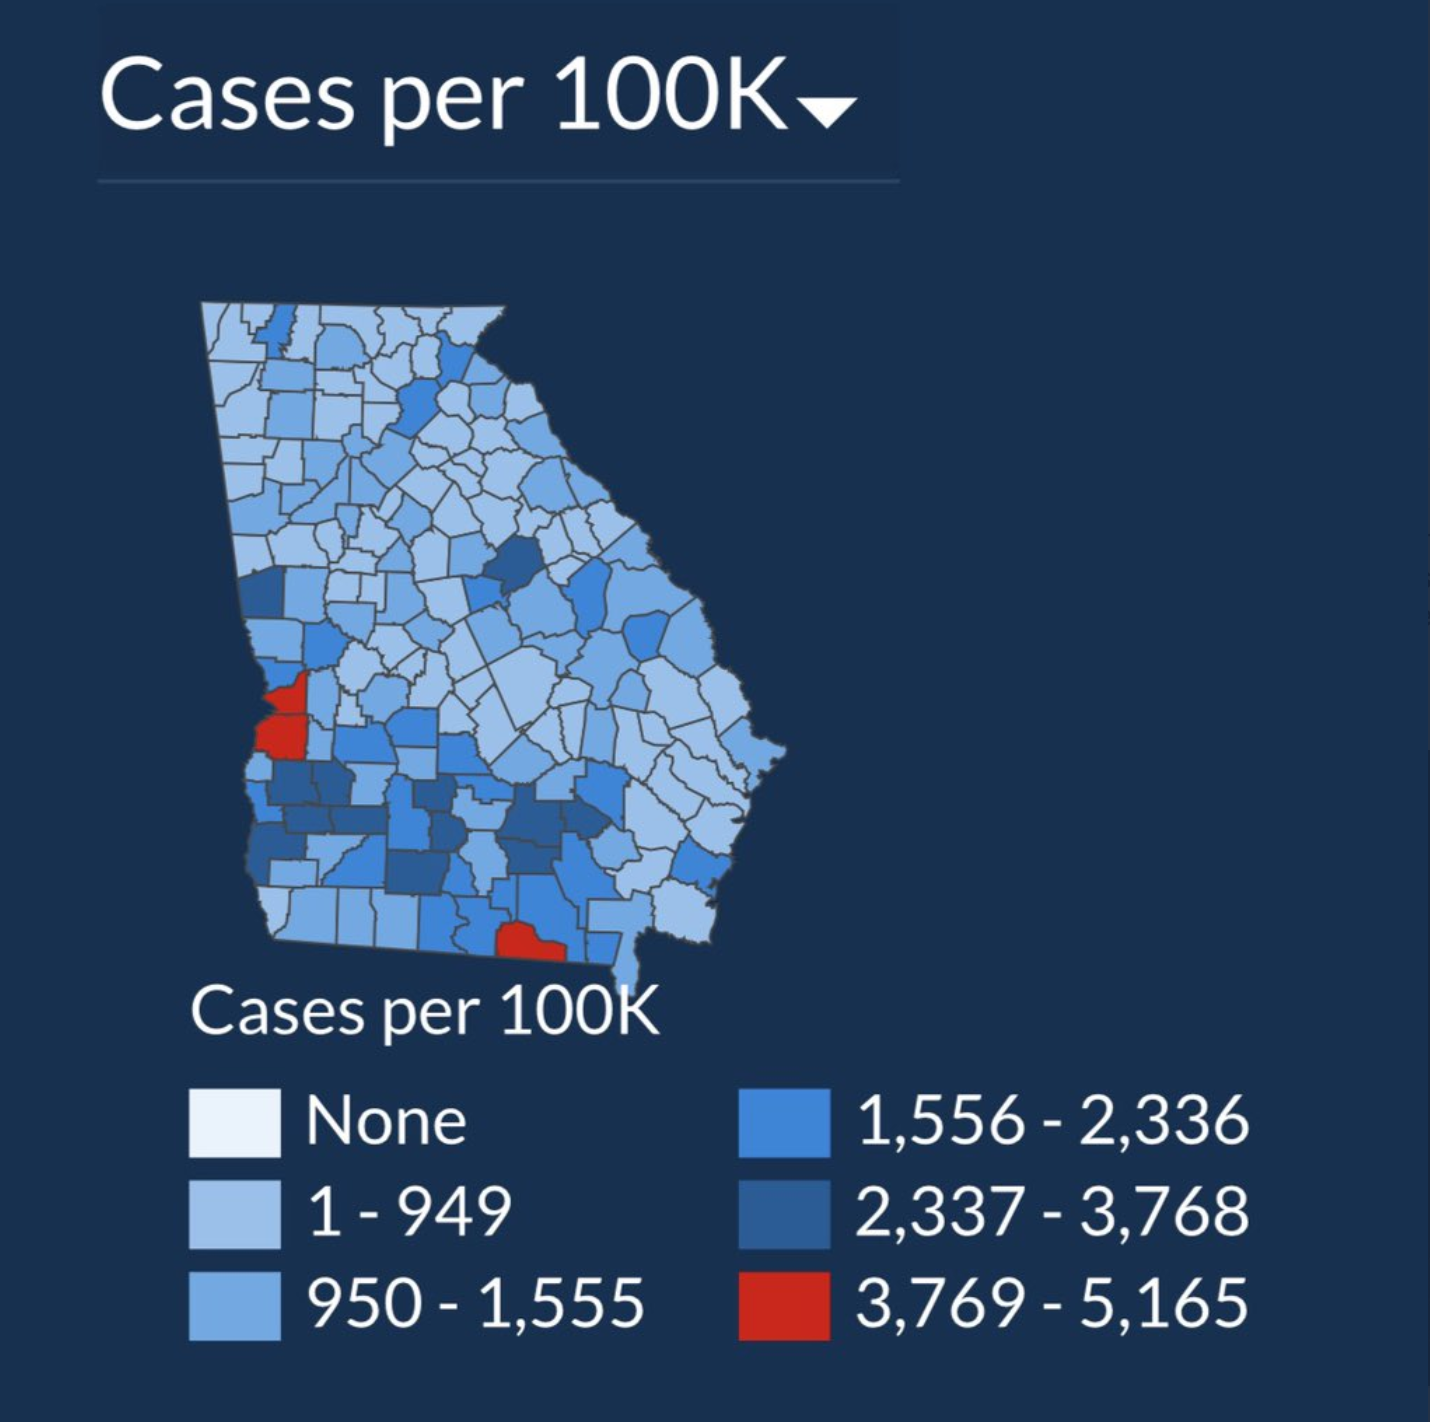 July 17th heat map visualization showing cases per 100K residents in Georgia, with three counties colored red. Bins represent none, 1-949 cases, 950 - 1555 cases, 1556-2336 cases, 2337 - 3768 cases, and the red bins represent 3769-5165 cases. 